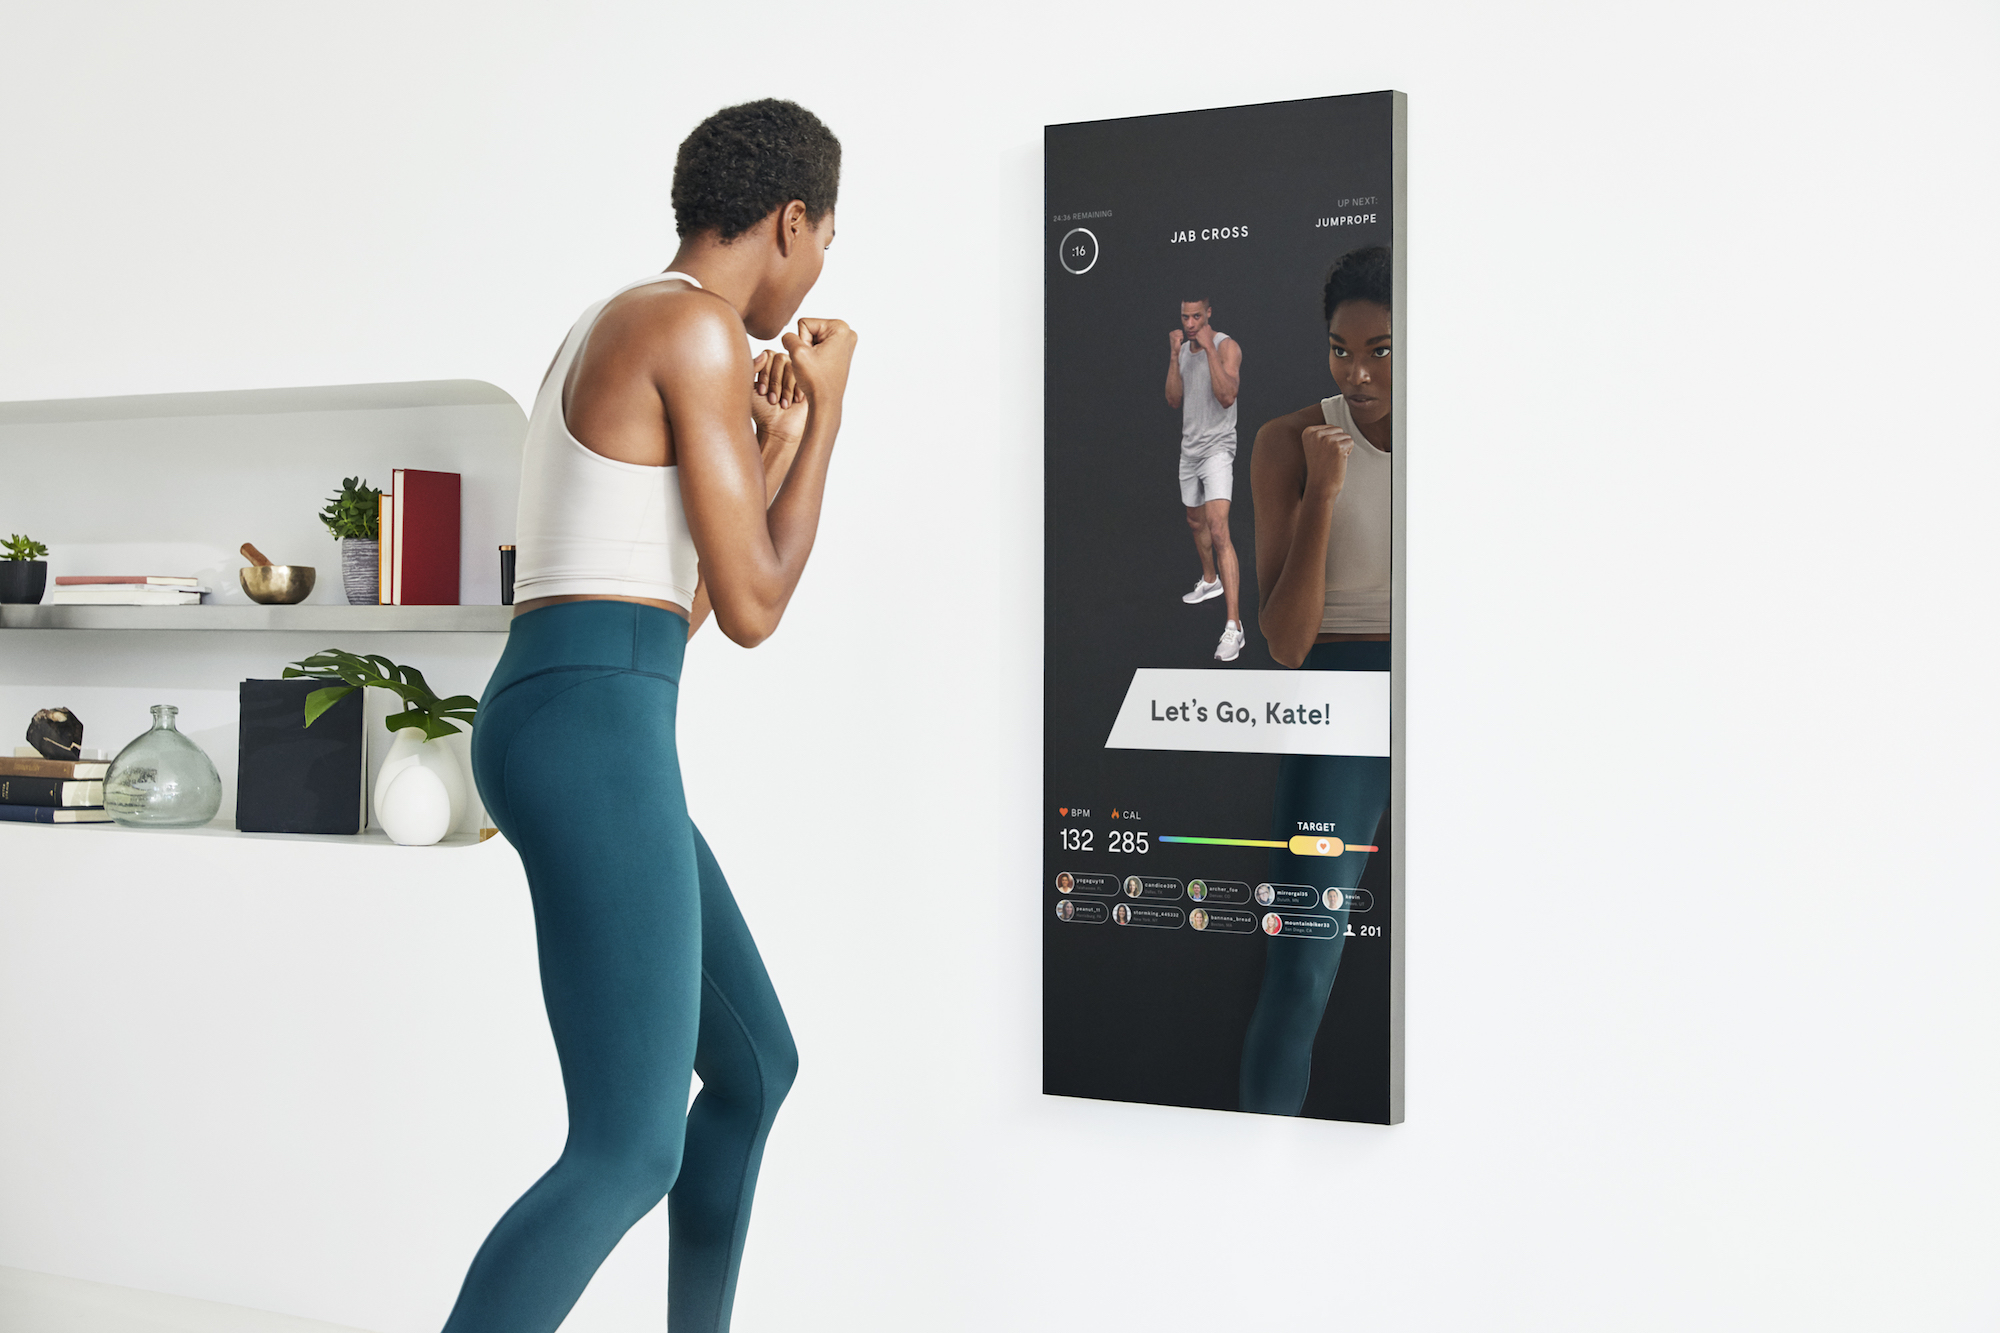 A $1,500 smart mirror brings live fitness classes to your home | Engadget2000 x 1333